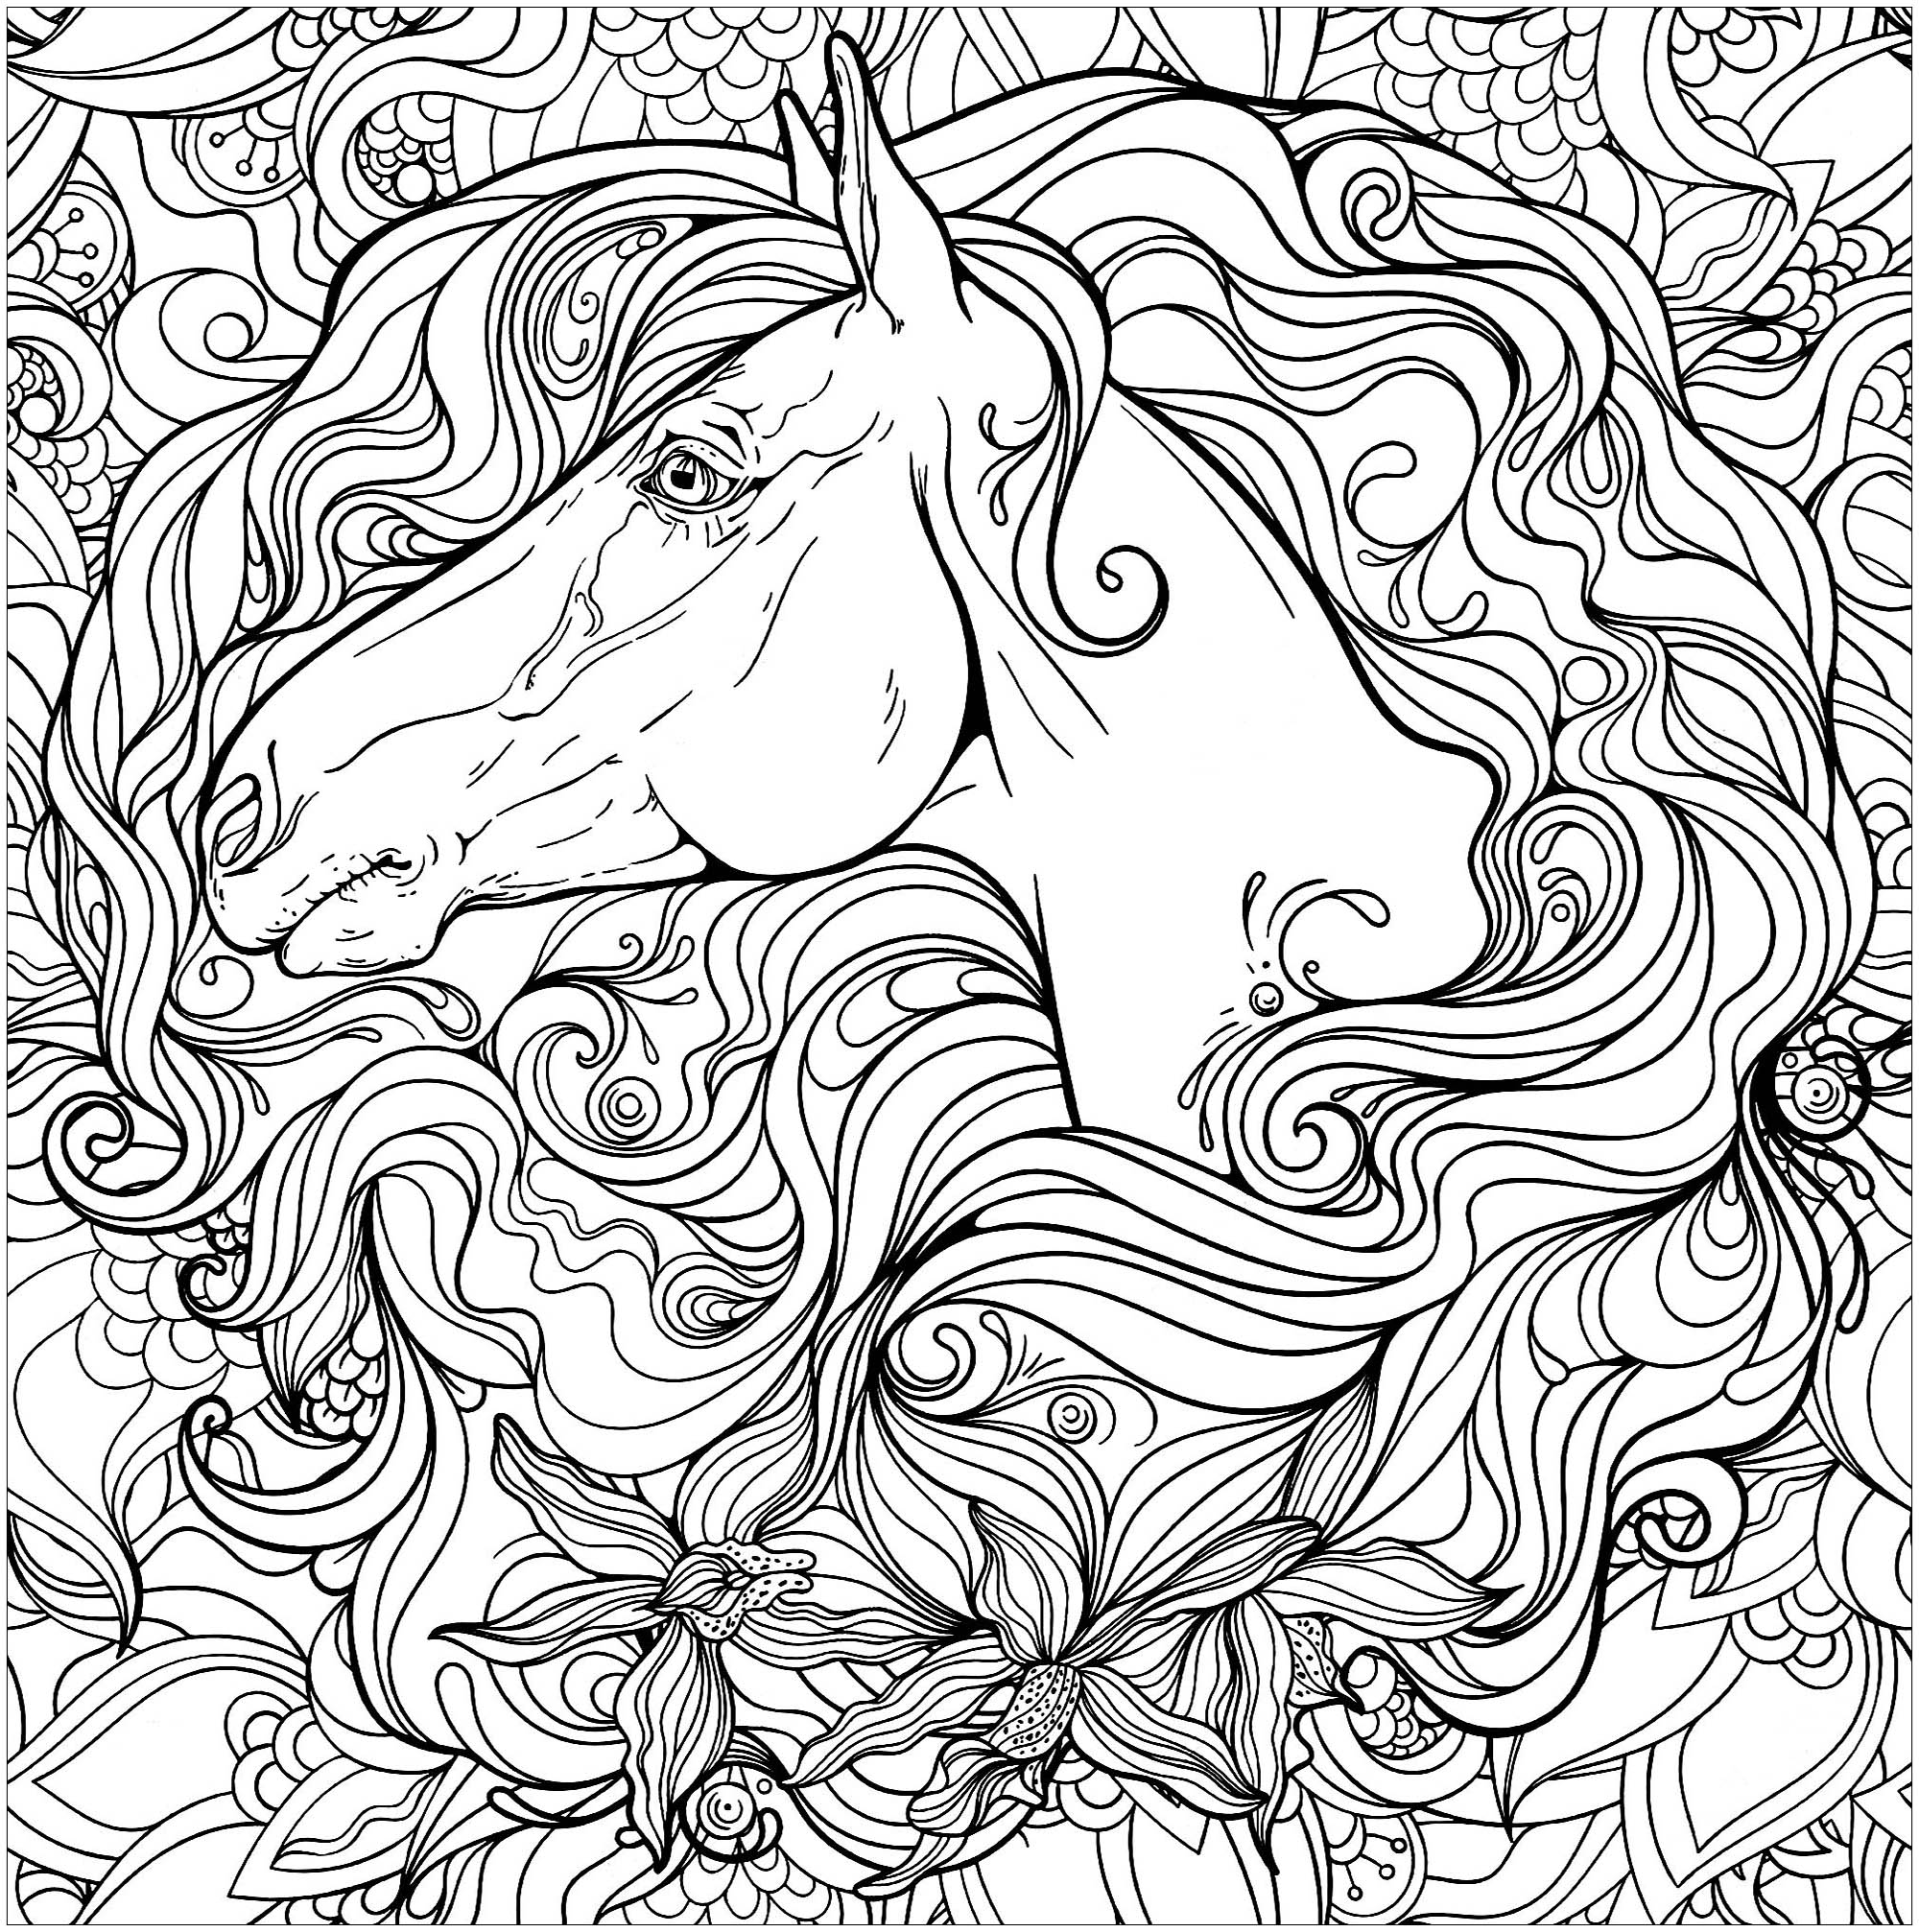 Drawing Horses to print to color